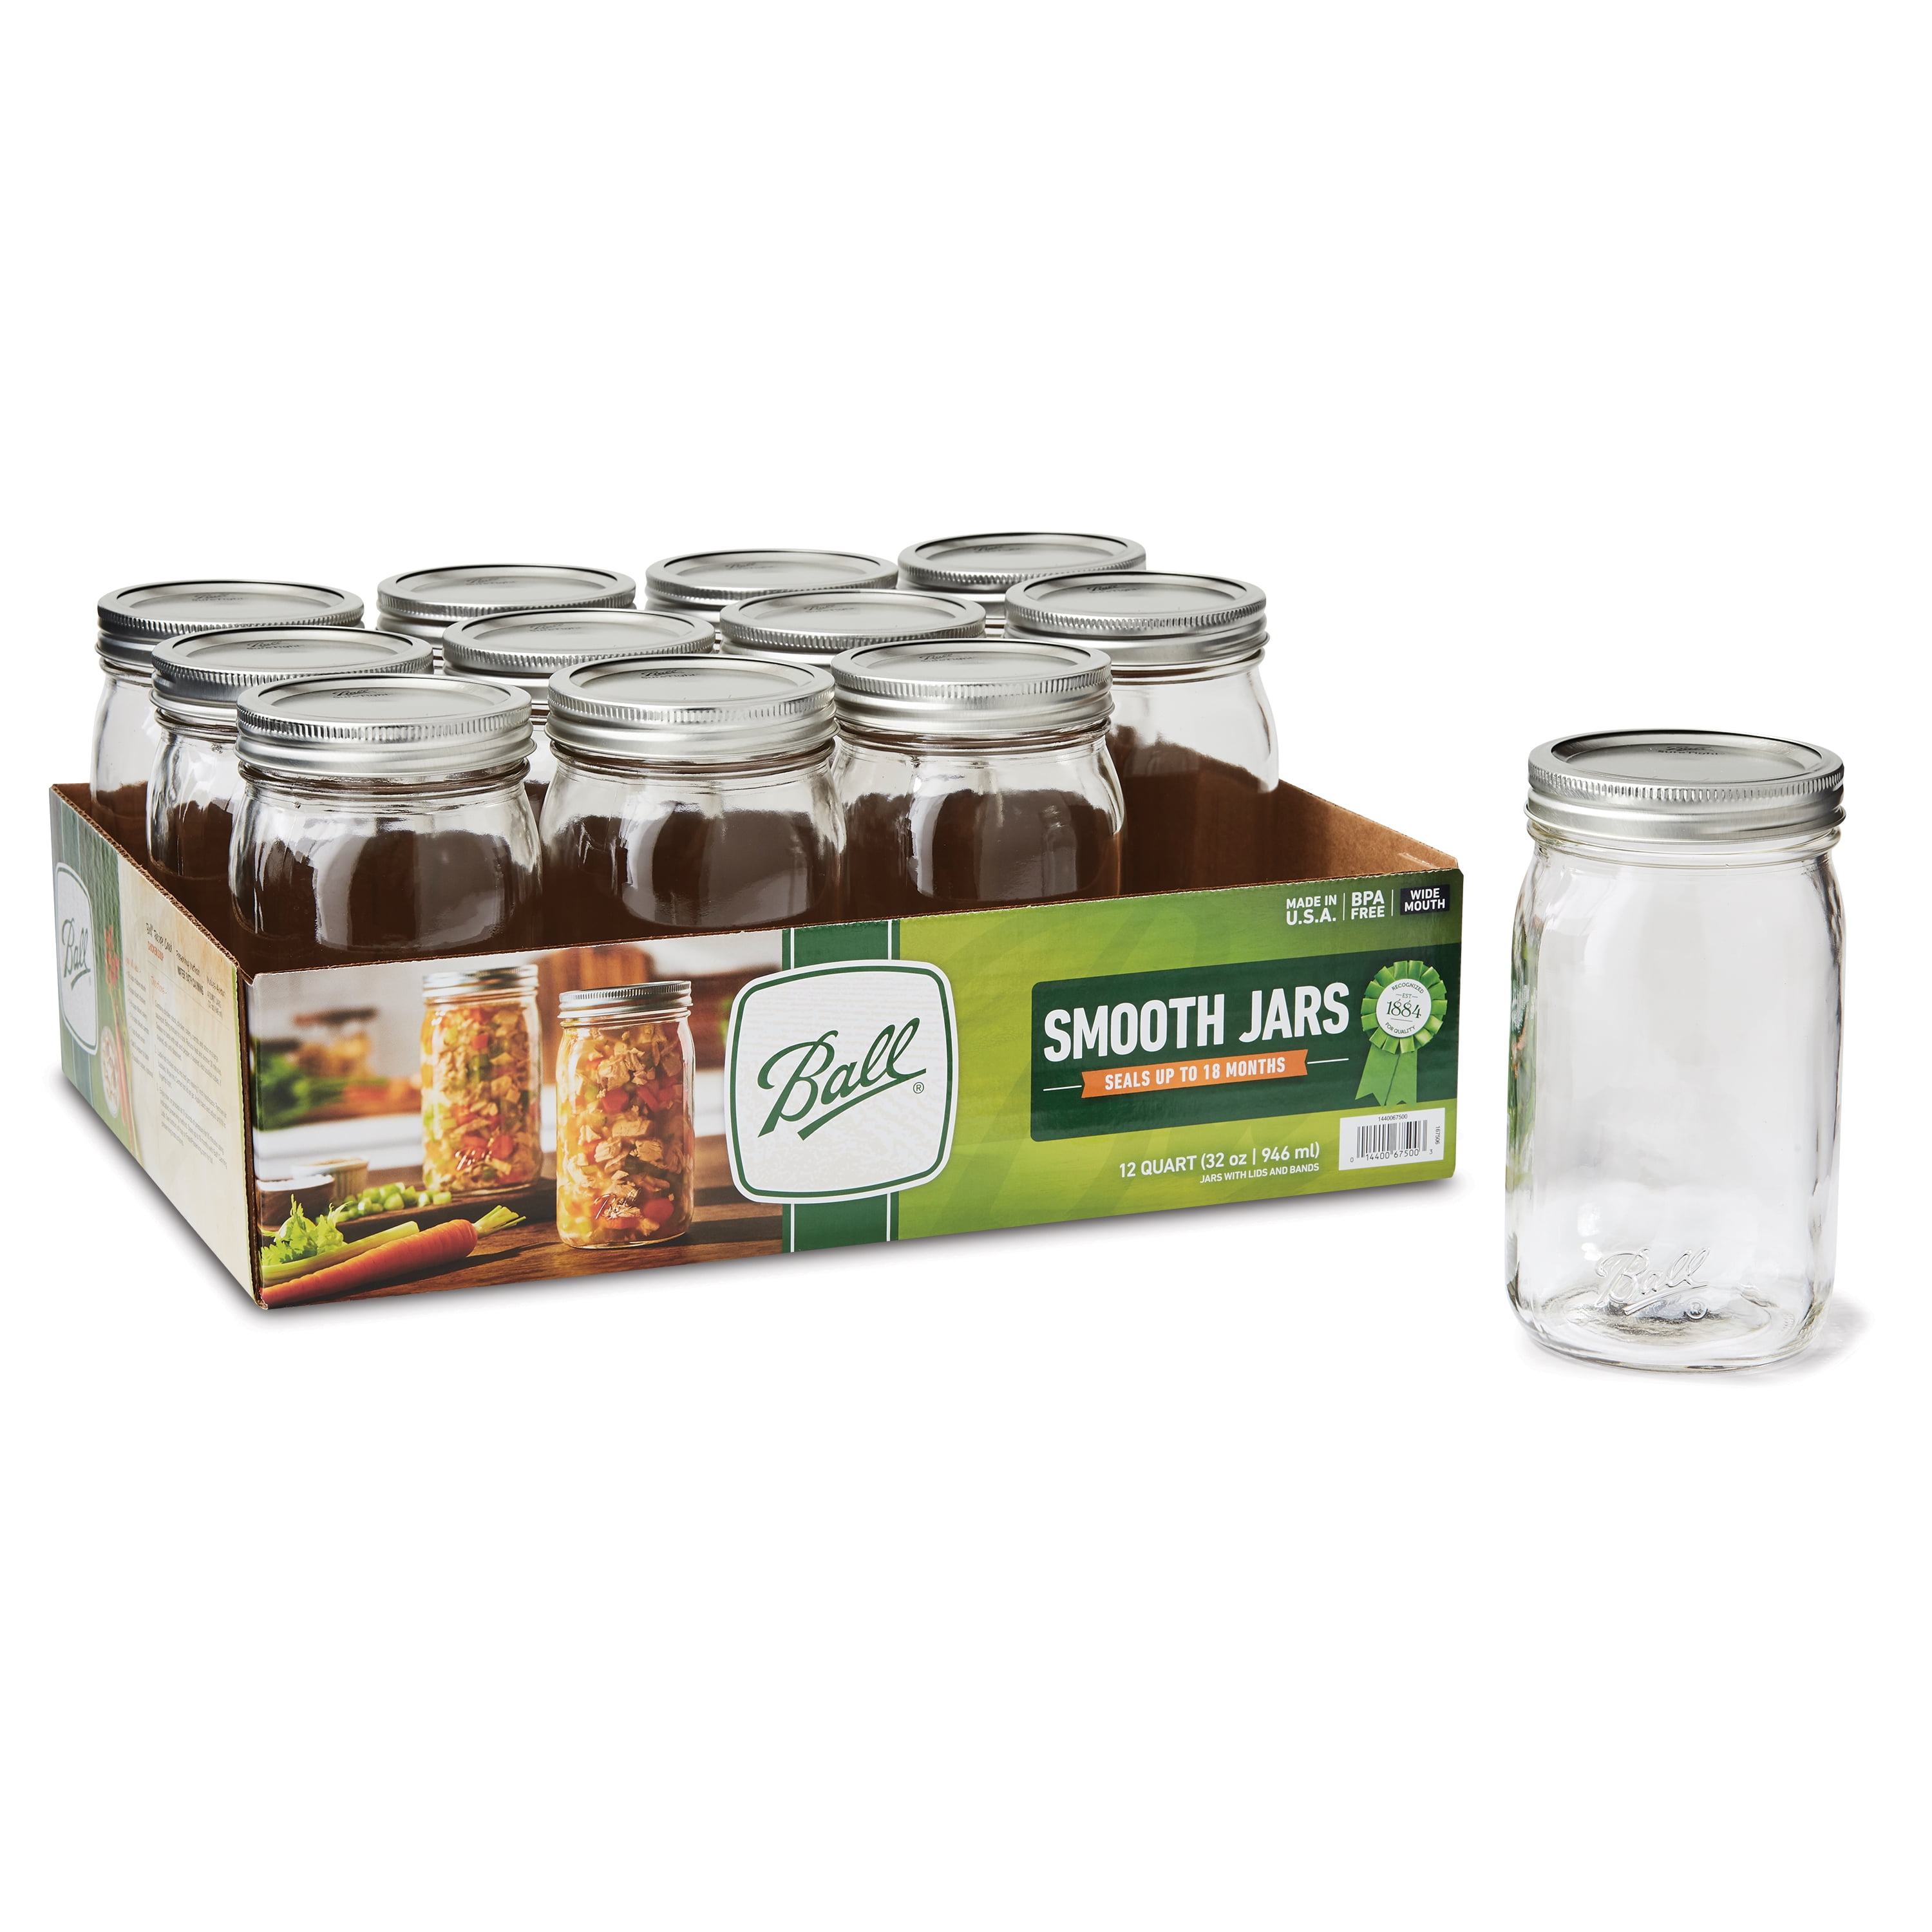 2 Pack,6 Count Ball Glass Mason Jar W/Lid & Band Wide Mouth 64 Ounces,